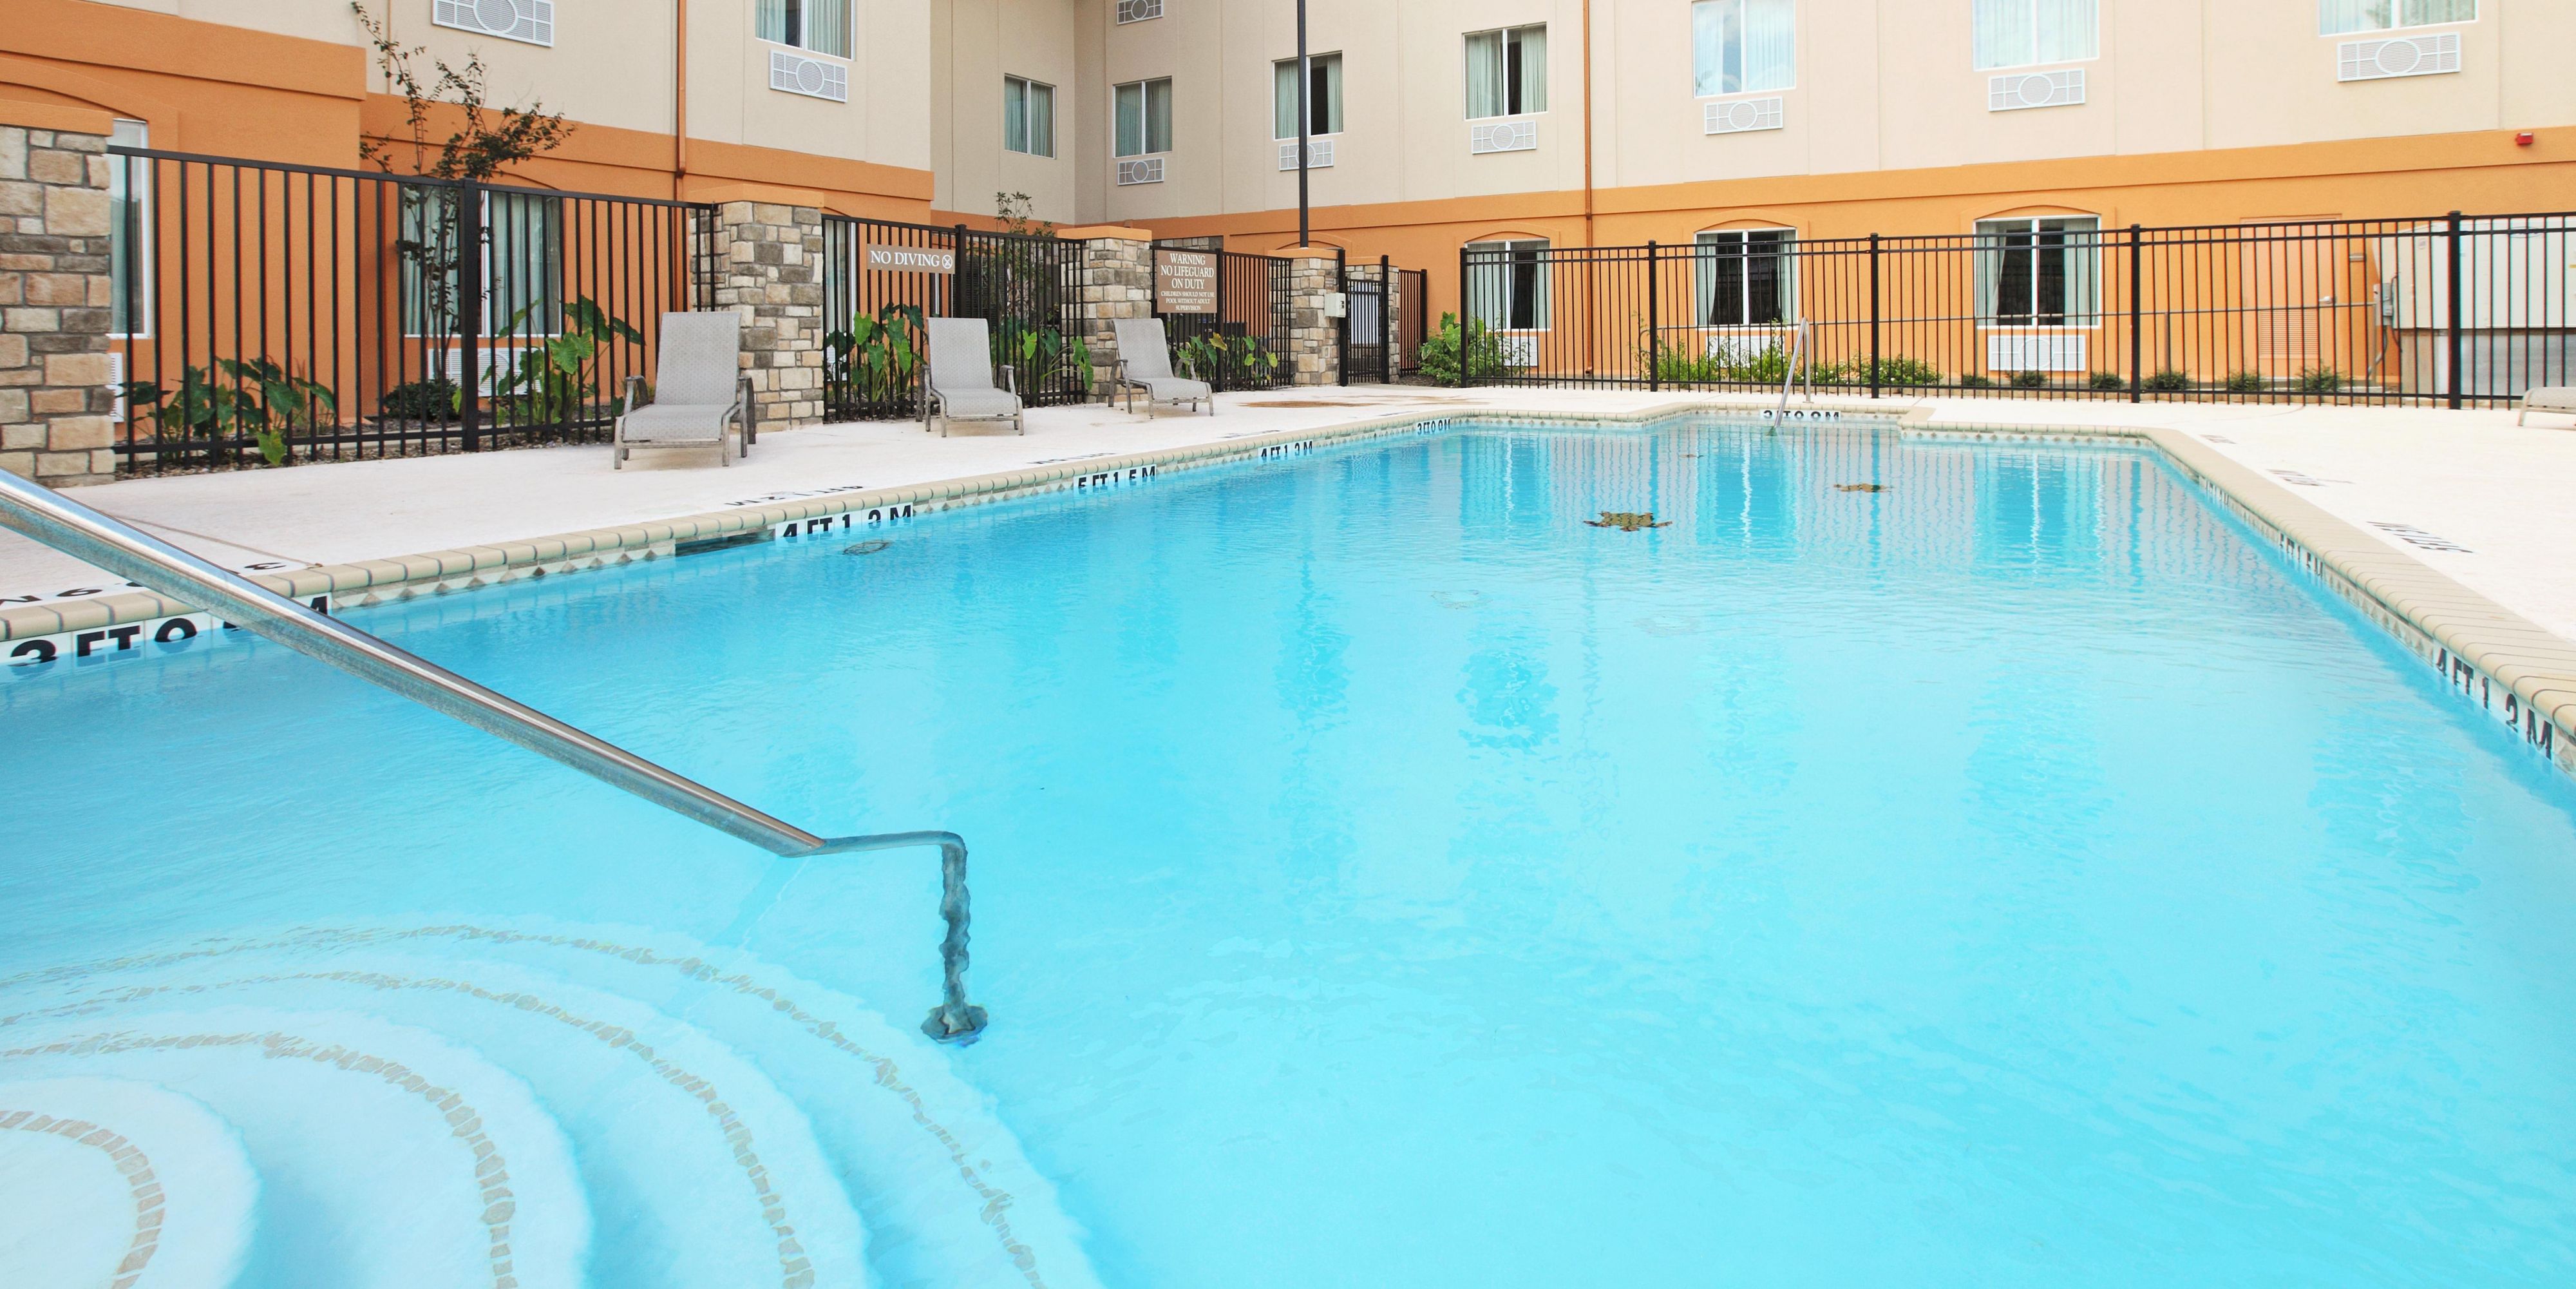 Enjoy a refreshing dip in our pool. You’ll find plenty of opportunities for relaxing in our abundant Texas sun!